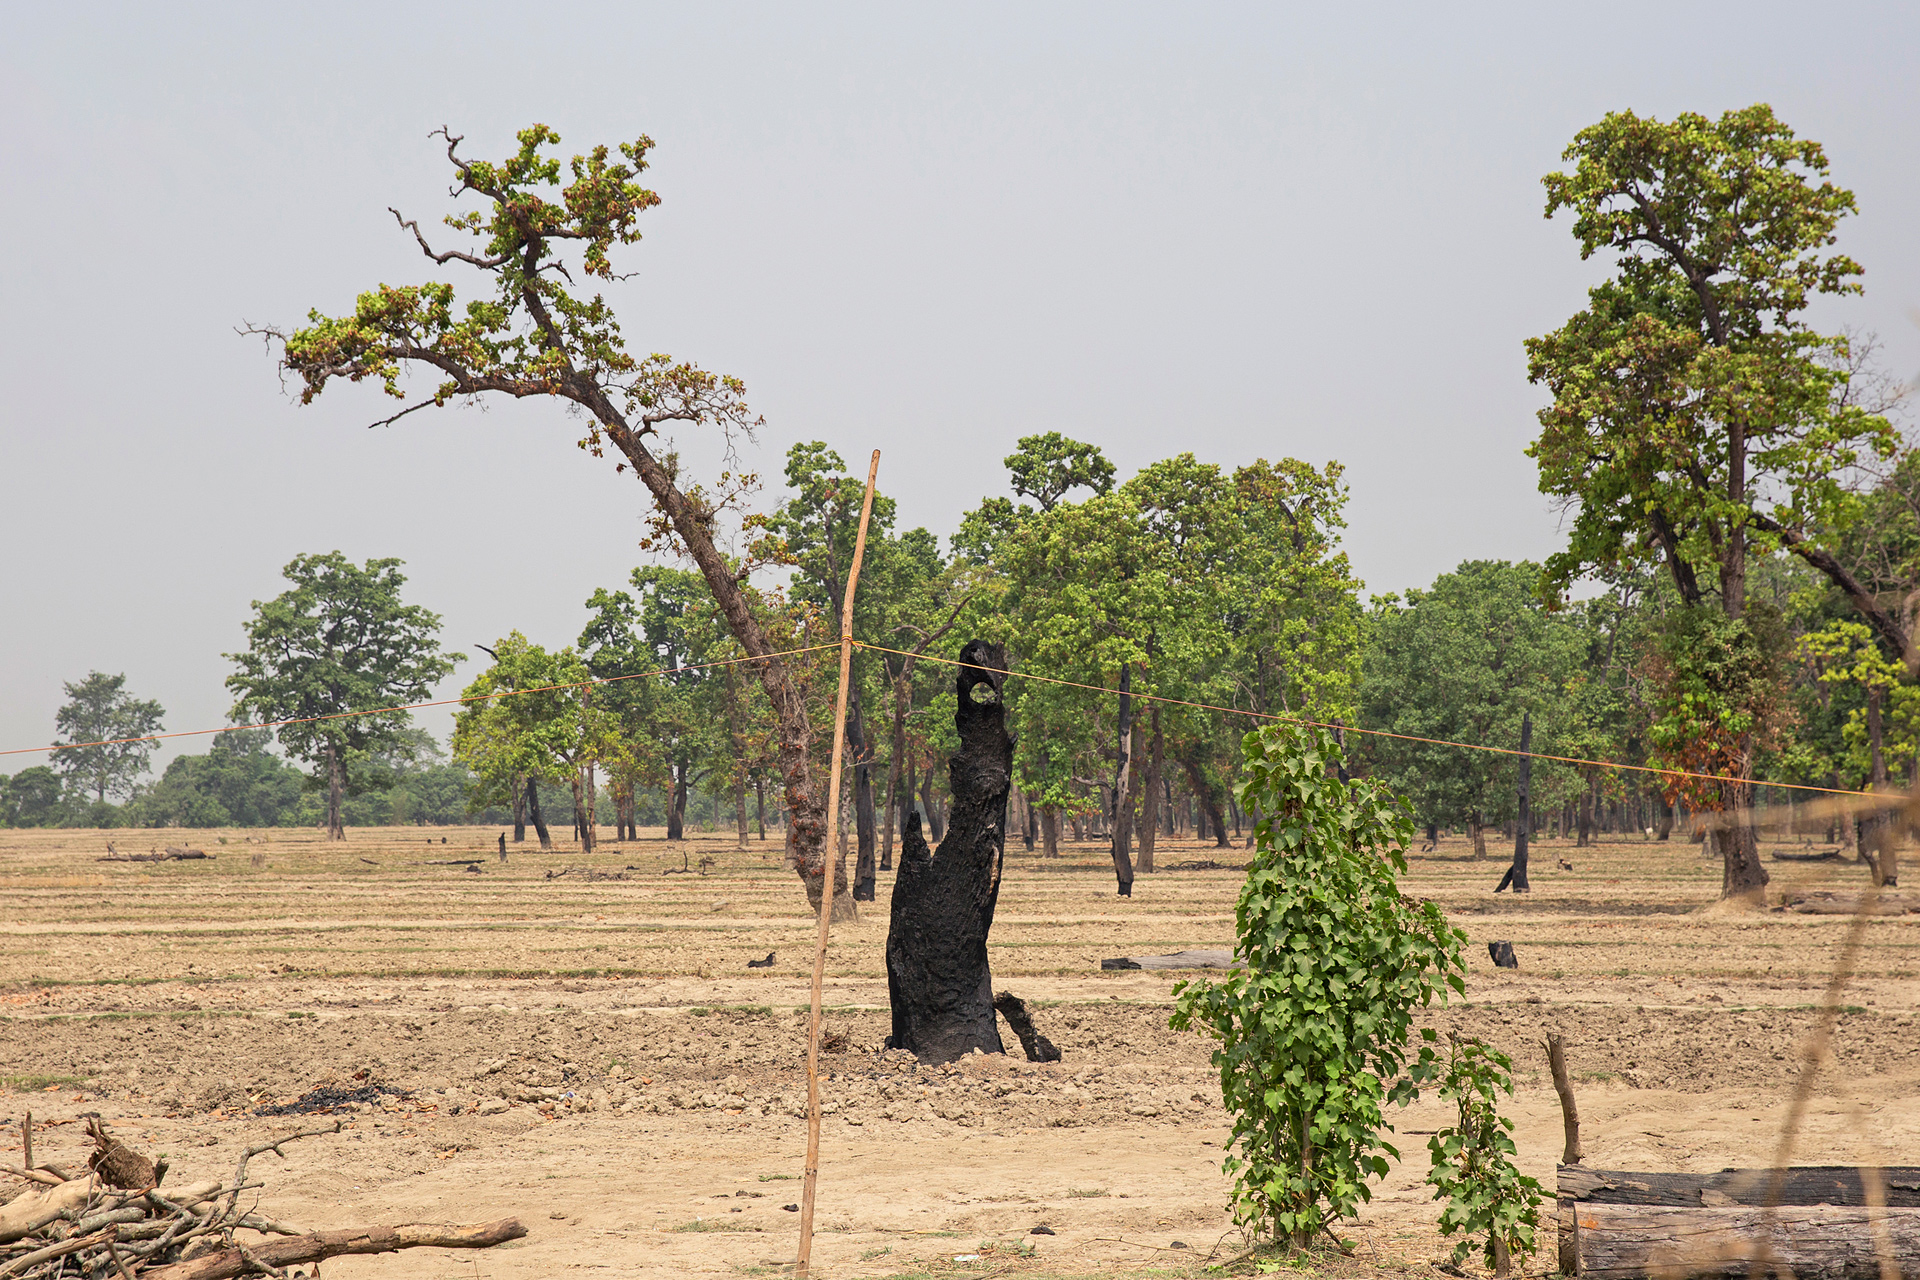 Charred trees on a dry field.